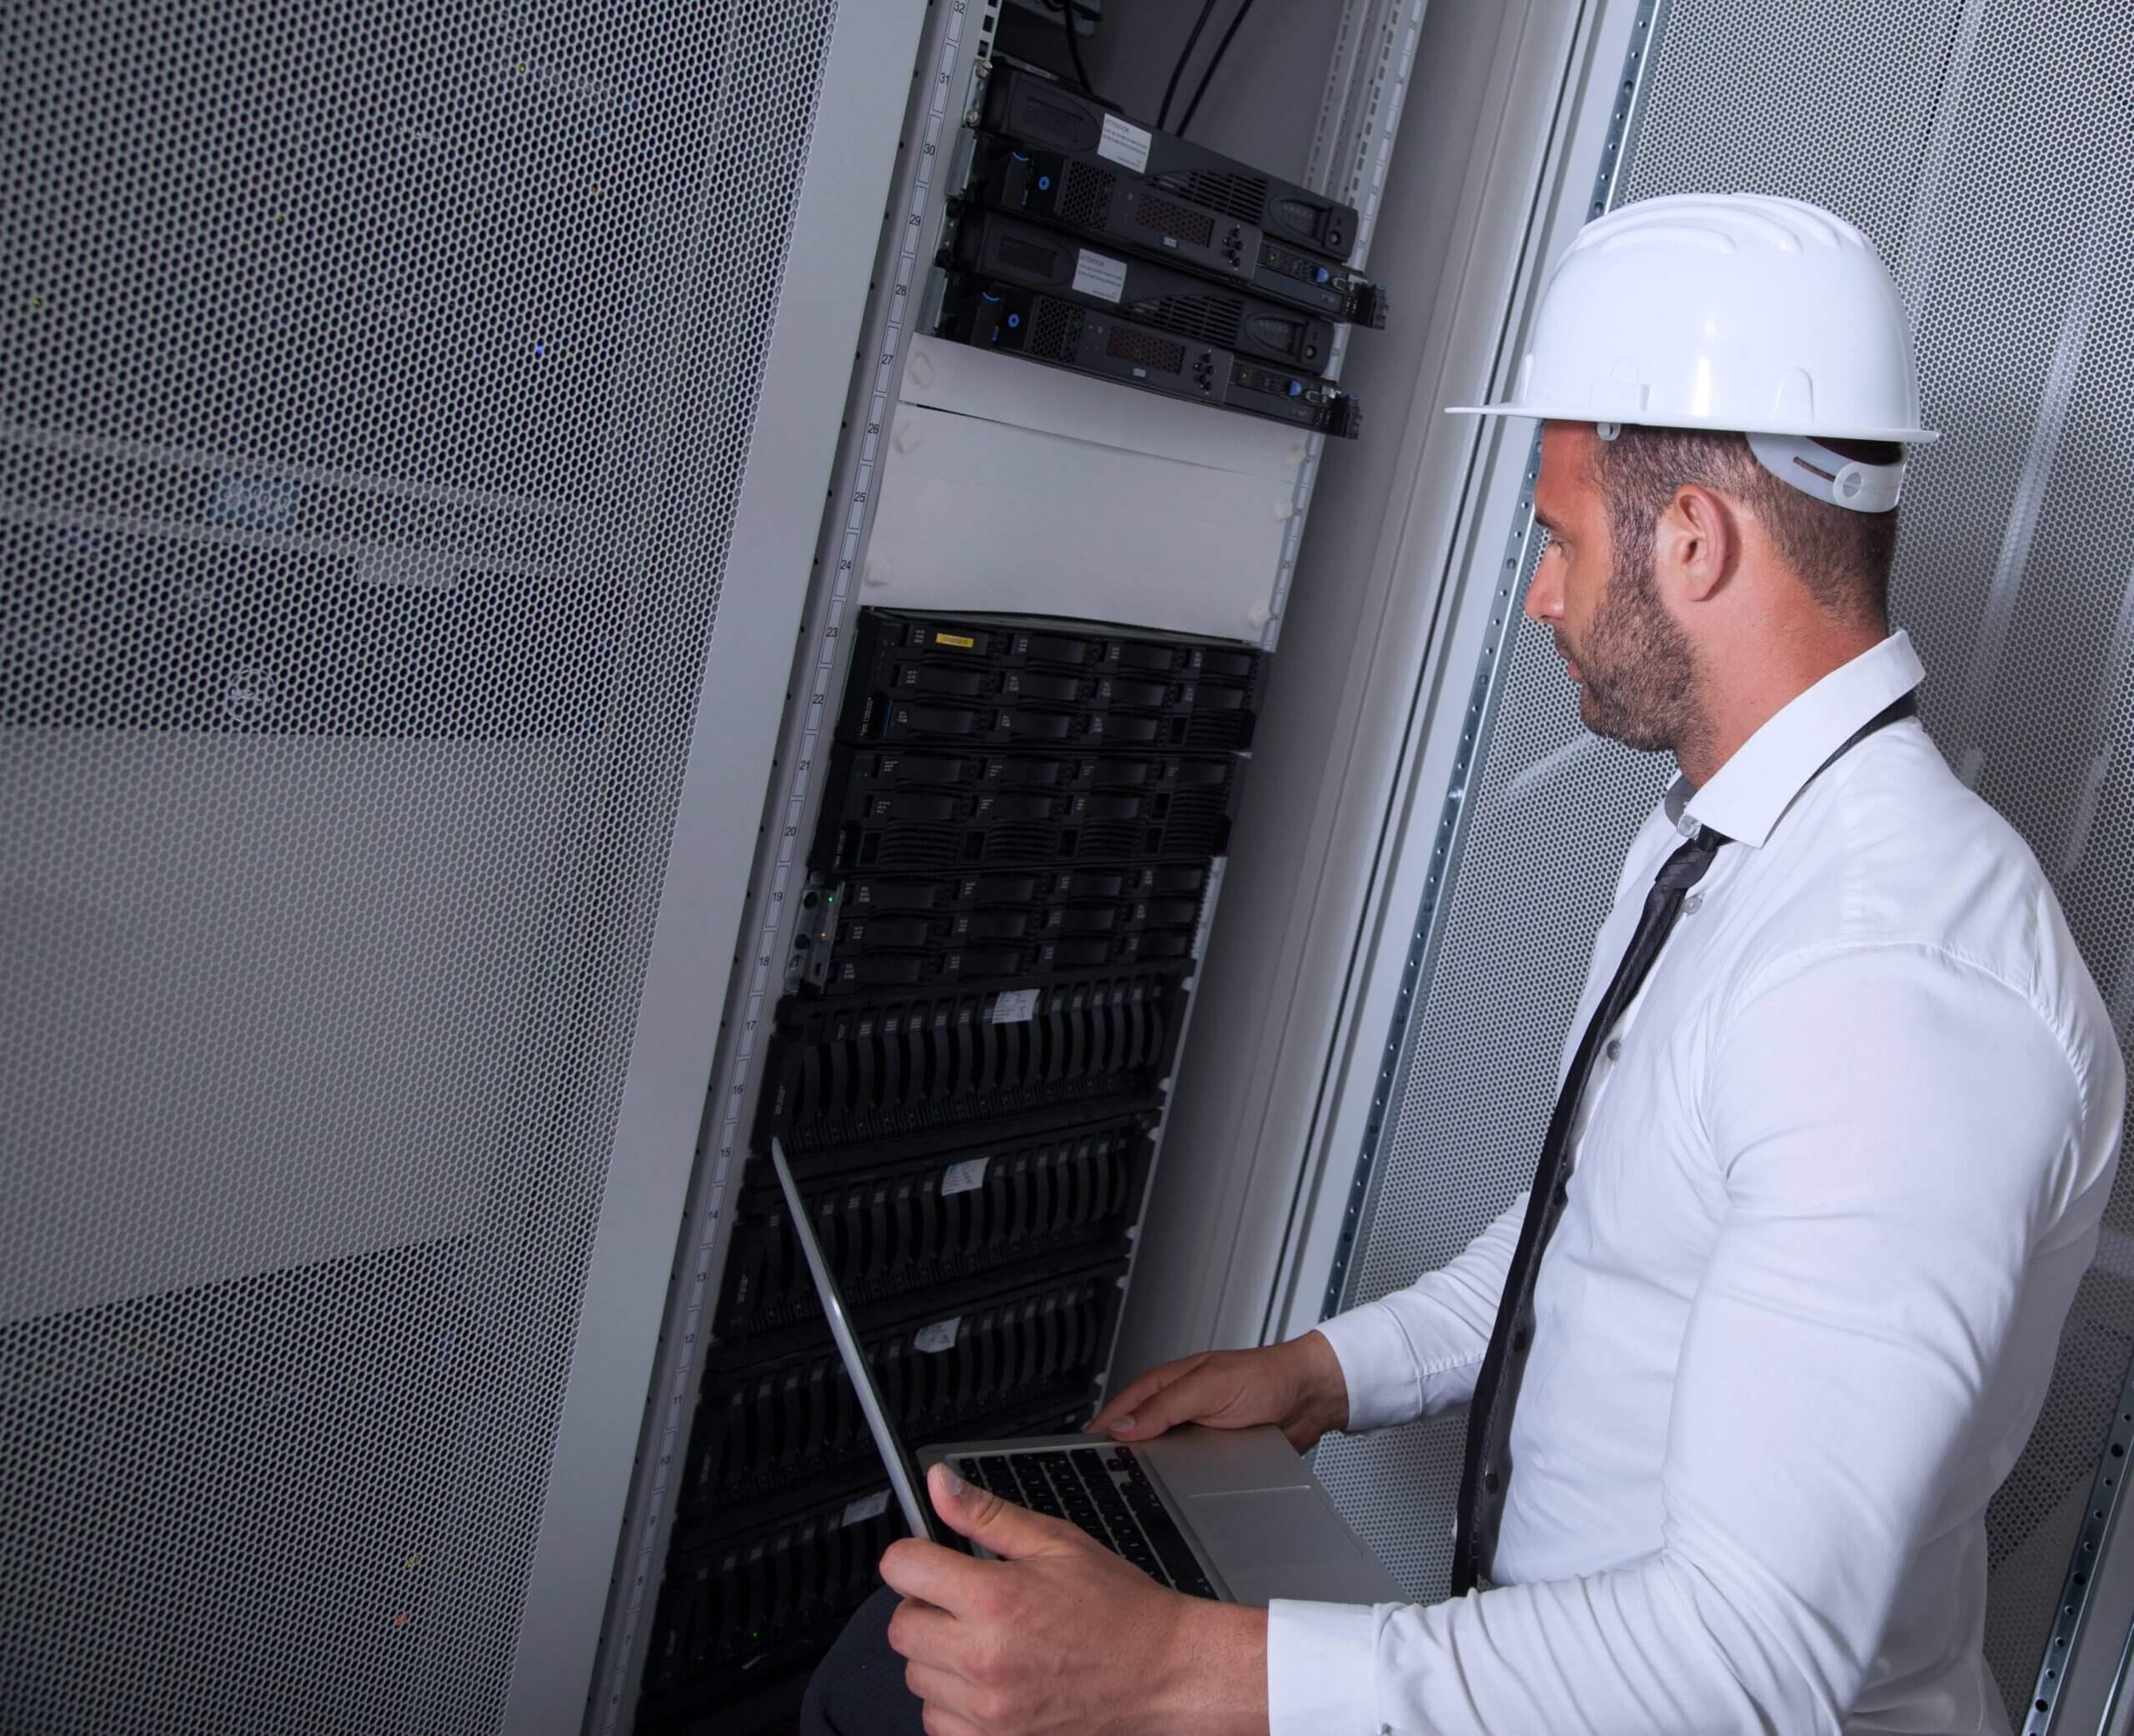 professional site surveyor performing an active site survey in a server room